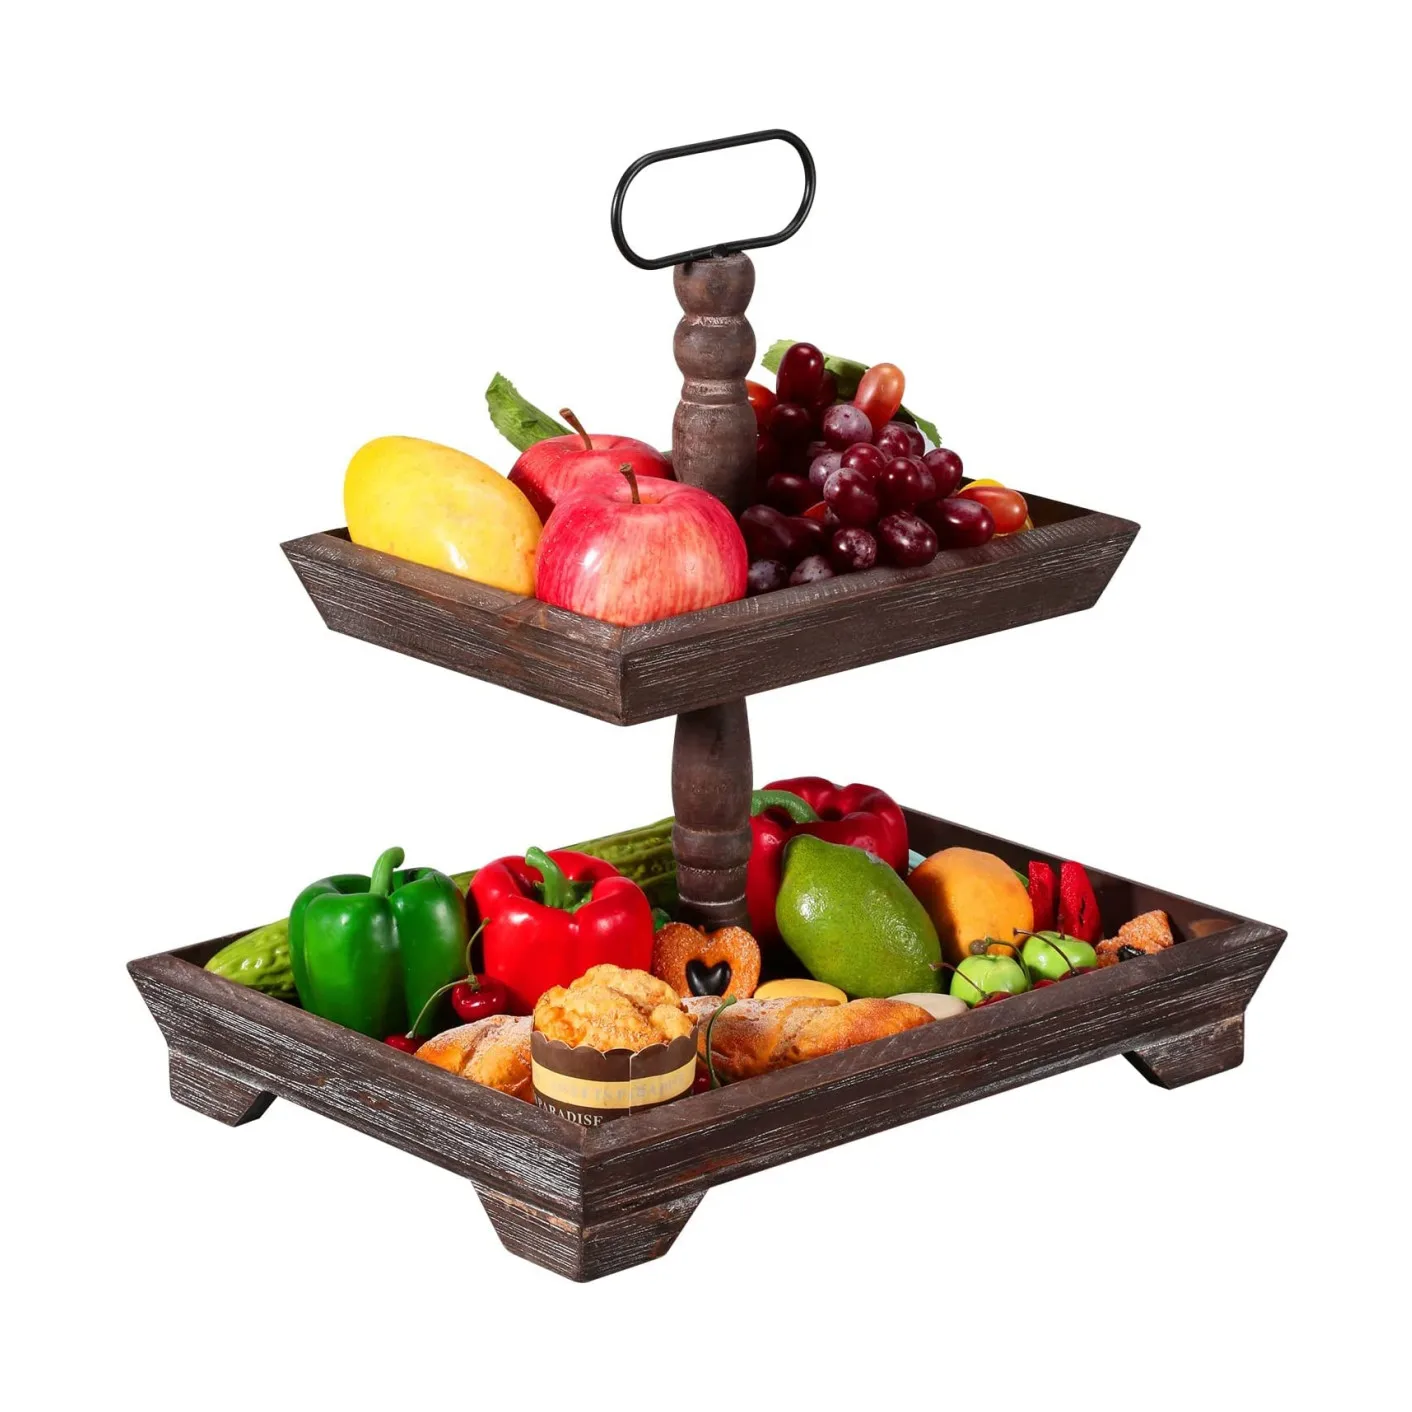 

home kitchen decorative food fruits candy dessert cake farmhouse rustic rectangular wooden 2 tier tiered wood serving tray